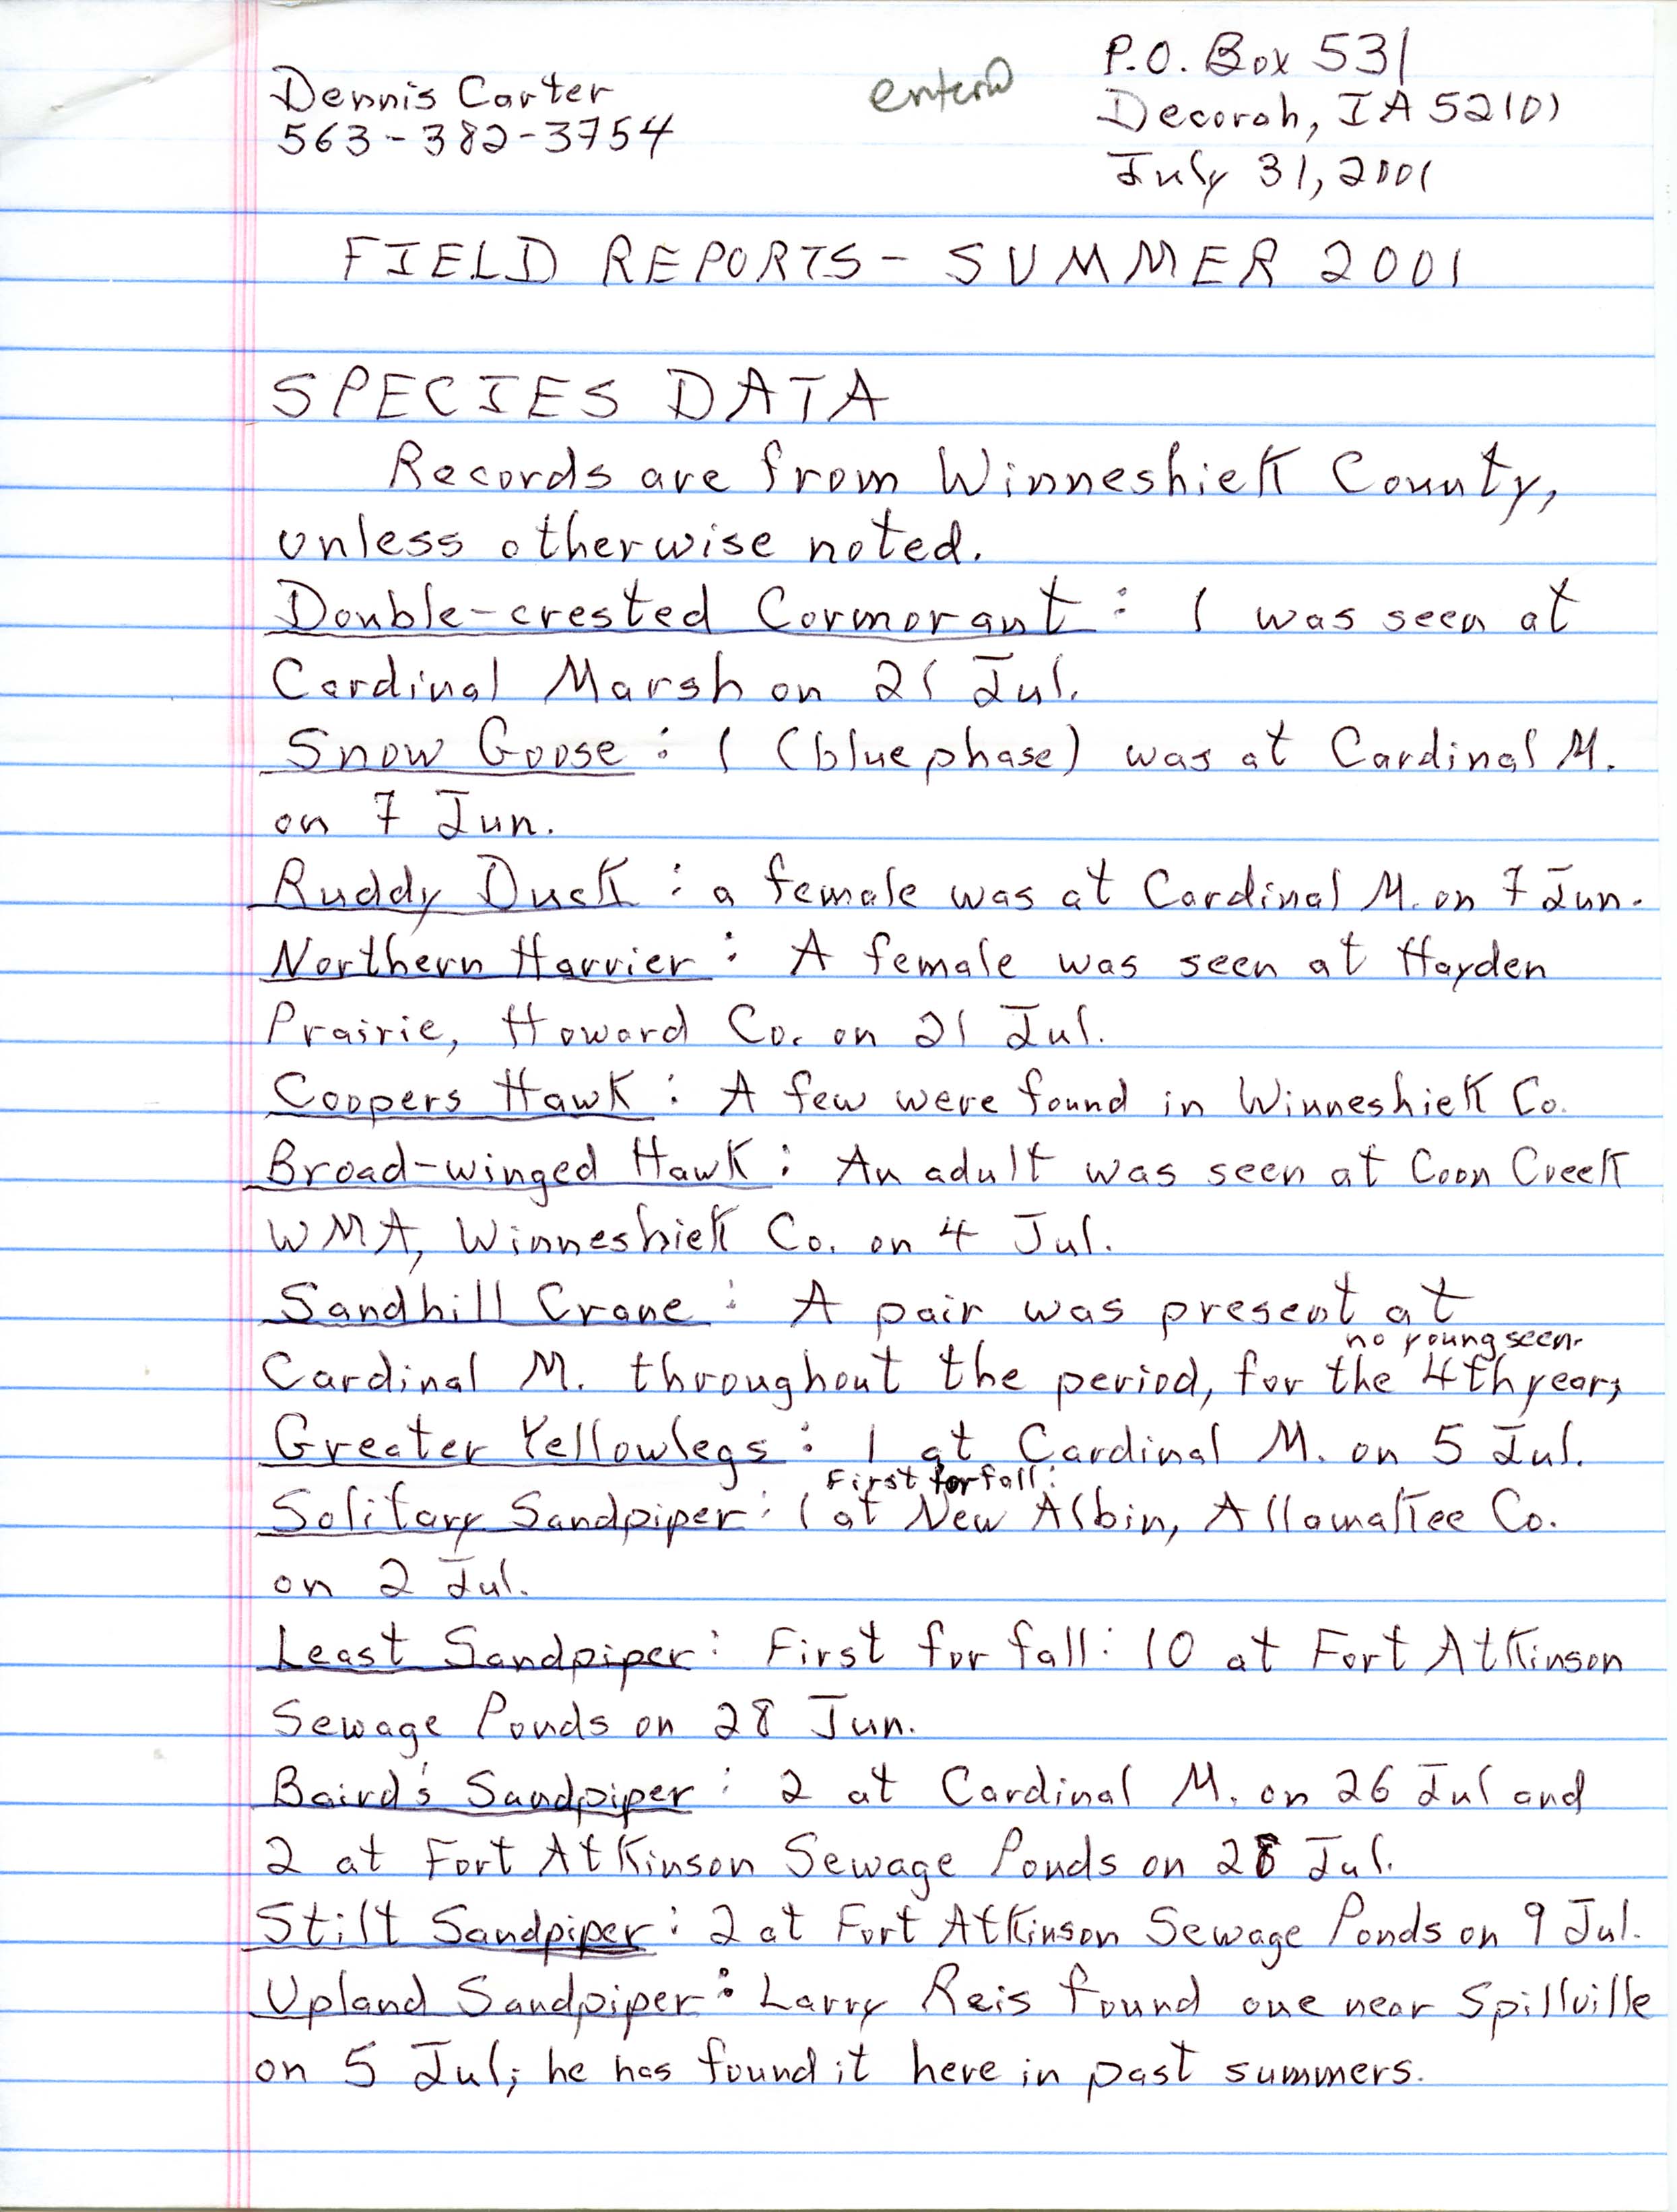 Field notes contributed by Dennis L. Carter, July 31, 2001